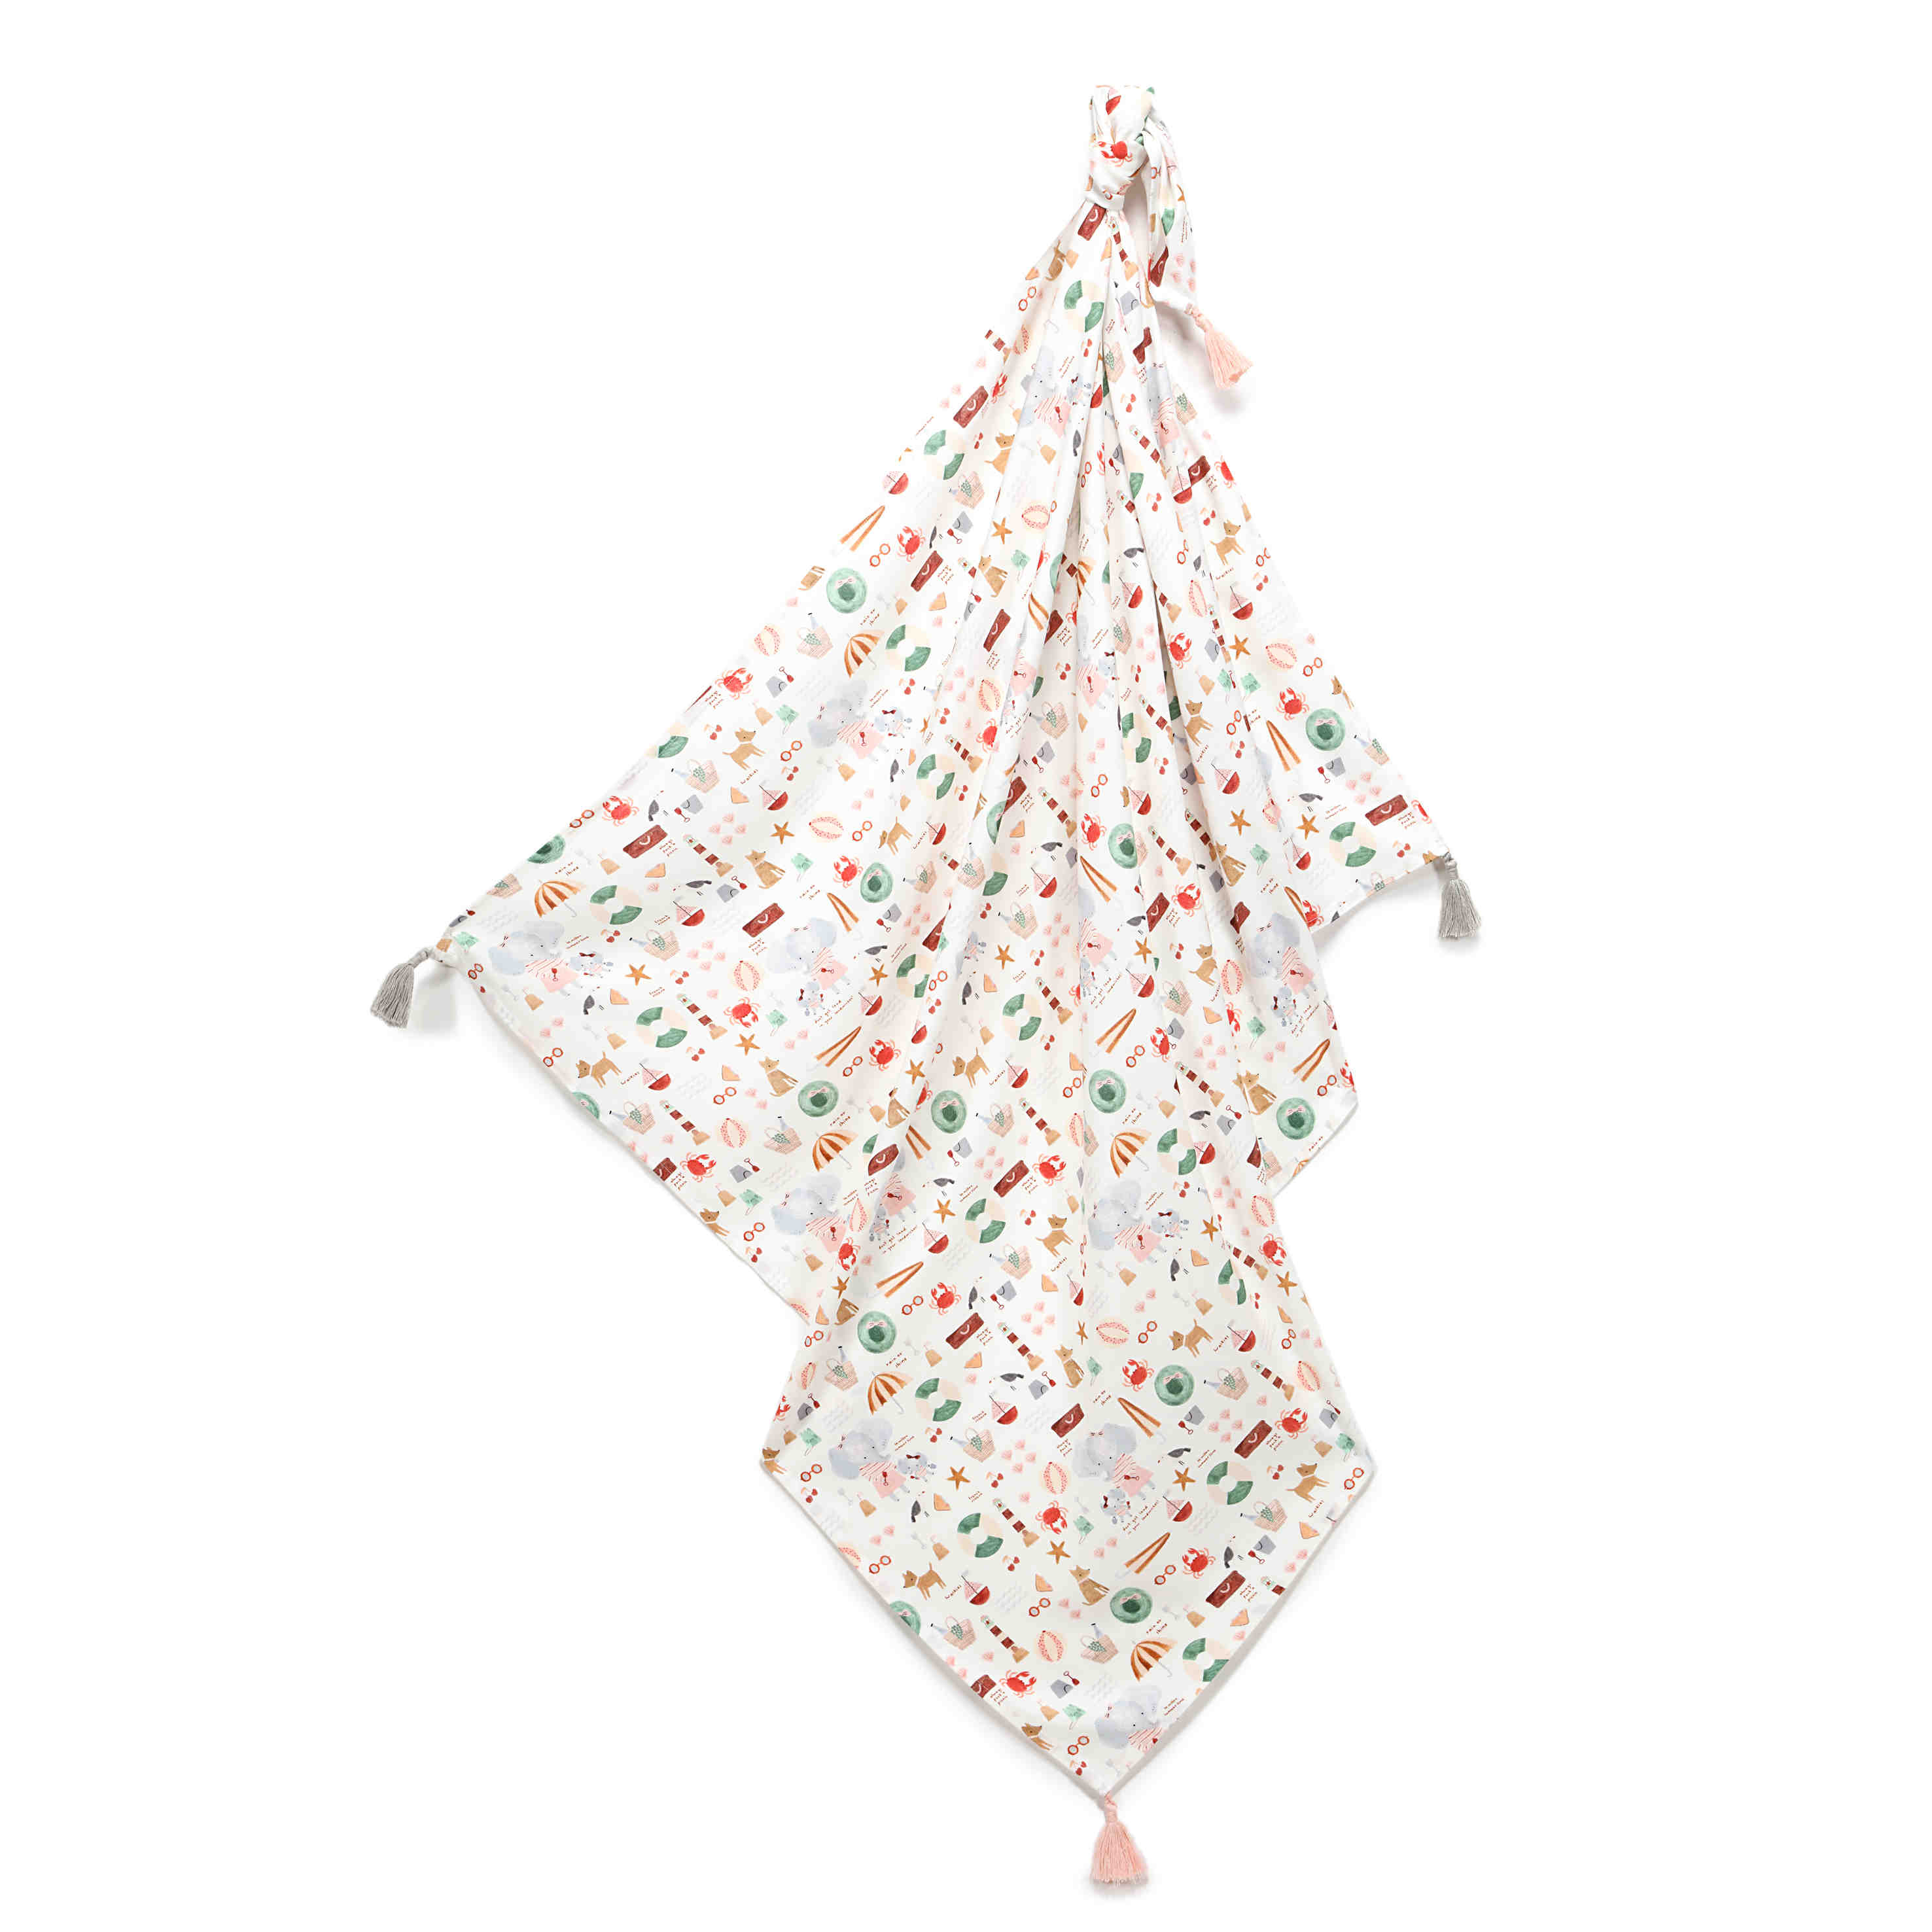 Multi-use swaddle - French riviera pink